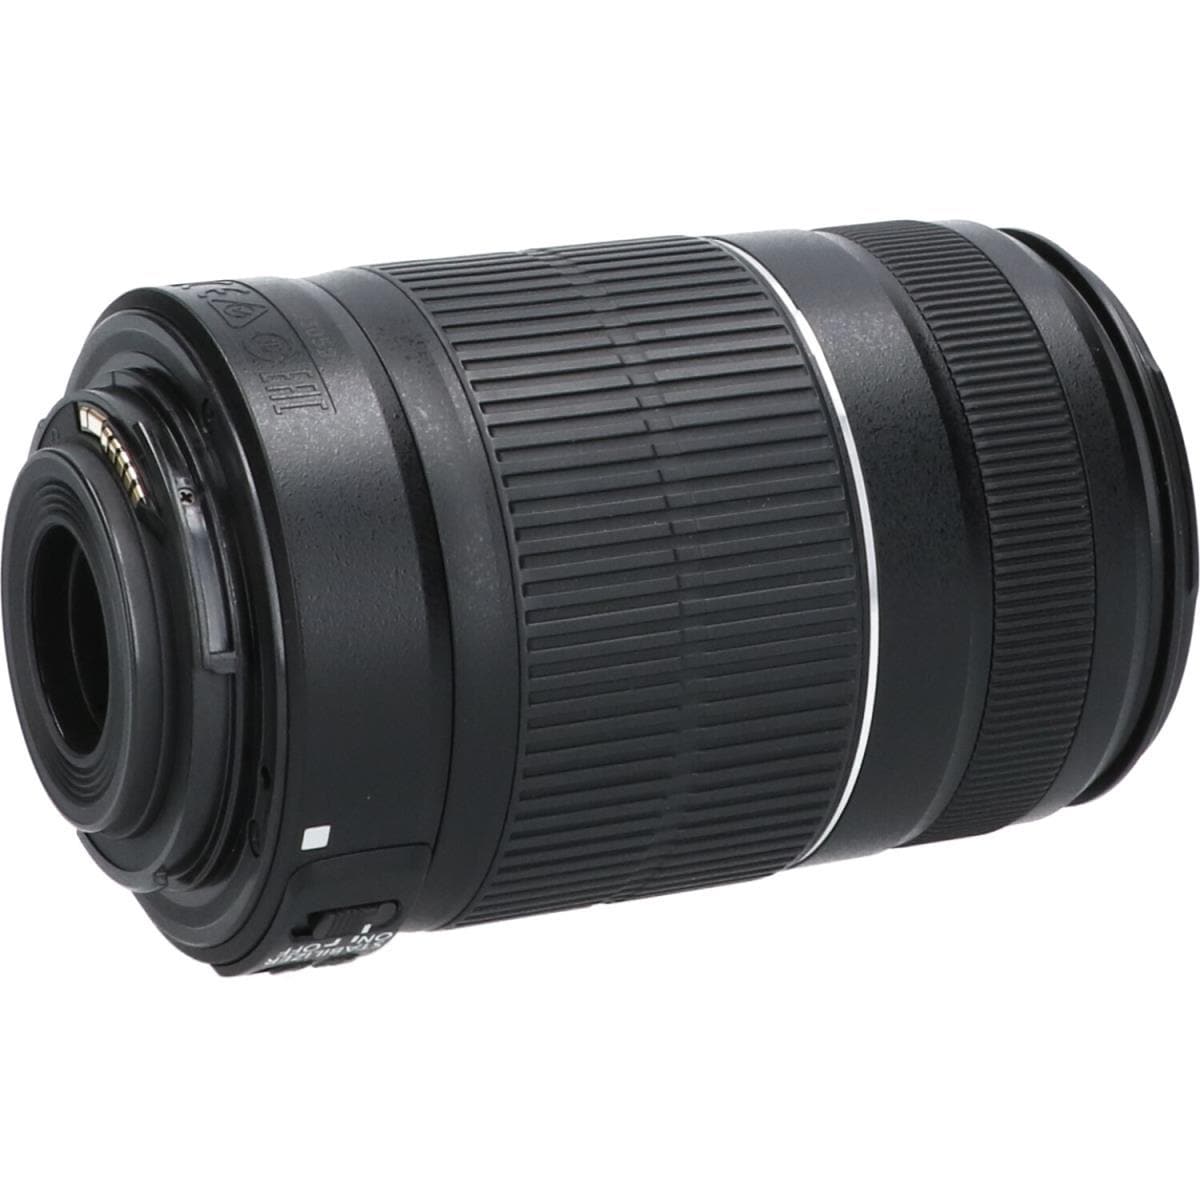 CANON EF-S55-250mm F4-5.6ISII